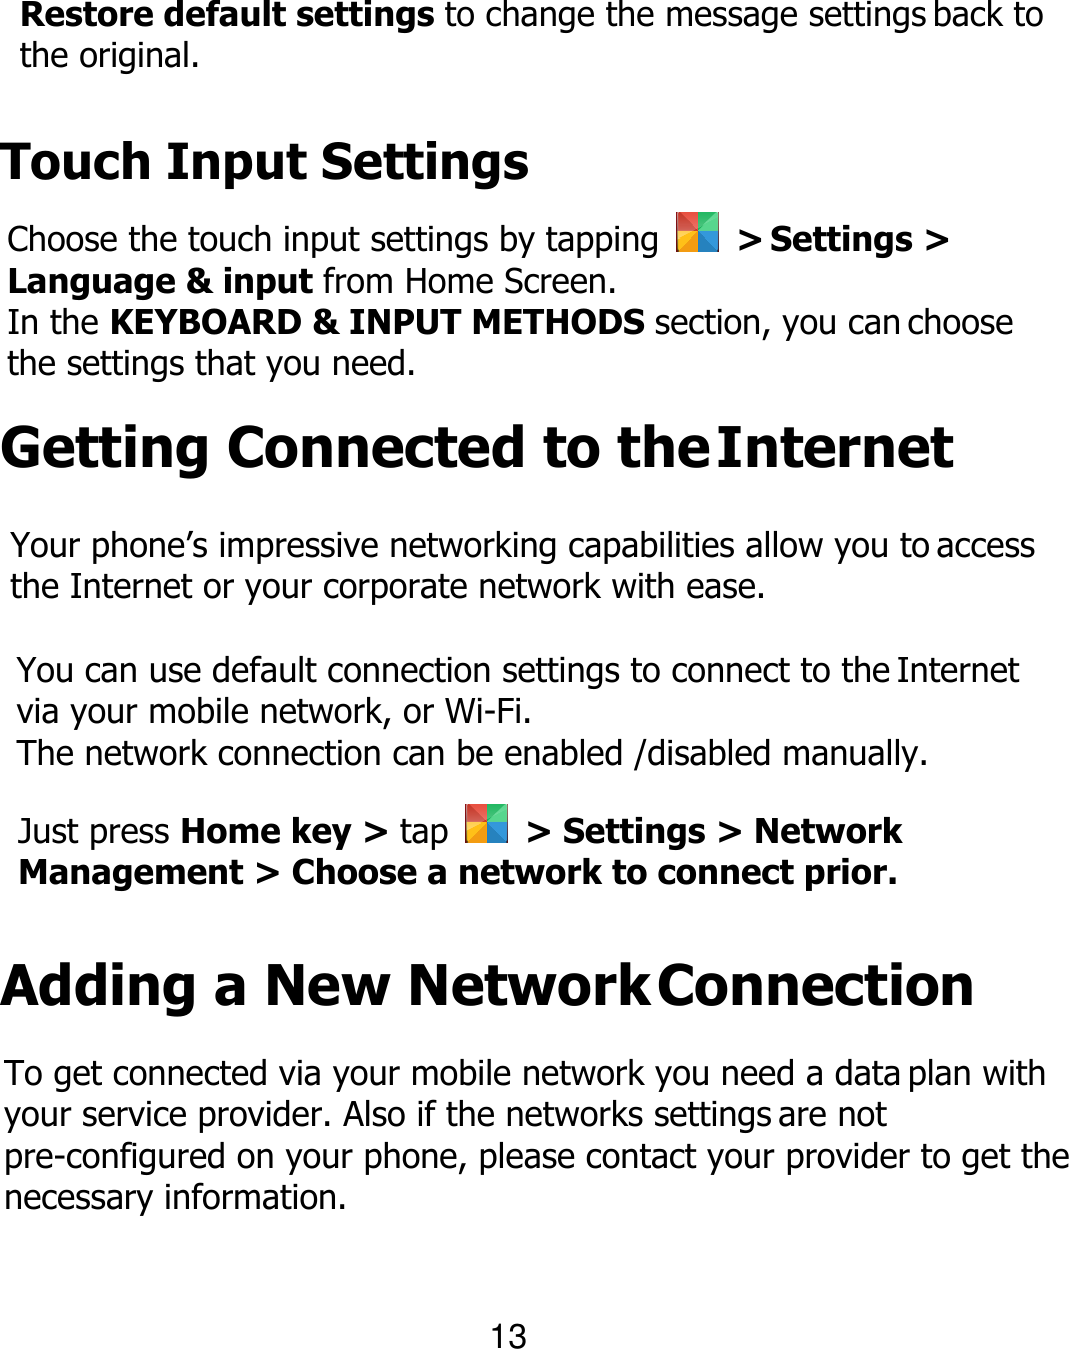 Restore default settings to change the message settings back to the original. Touch Input Settings Choose the touch input settings by tapping    &gt; Settings &gt; Language &amp; input from Home Screen. In the KEYBOARD &amp; INPUT METHODS section, you can choose the settings that you need. Getting Connected to the Internet Your phone’s impressive networking capabilities allow you to access the Internet or your corporate network with ease. You can use default connection settings to connect to the Internet via your mobile network, or Wi-Fi. The network connection can be enabled /disabled manually. Just press Home key &gt; tap    &gt; Settings &gt; Network Management &gt; Choose a network to connect prior. Adding a New Network Connection To get connected via your mobile network you need a data plan with your service provider. Also if the networks settings are not pre-configured on your phone, please contact your provider to get the necessary information. 13 